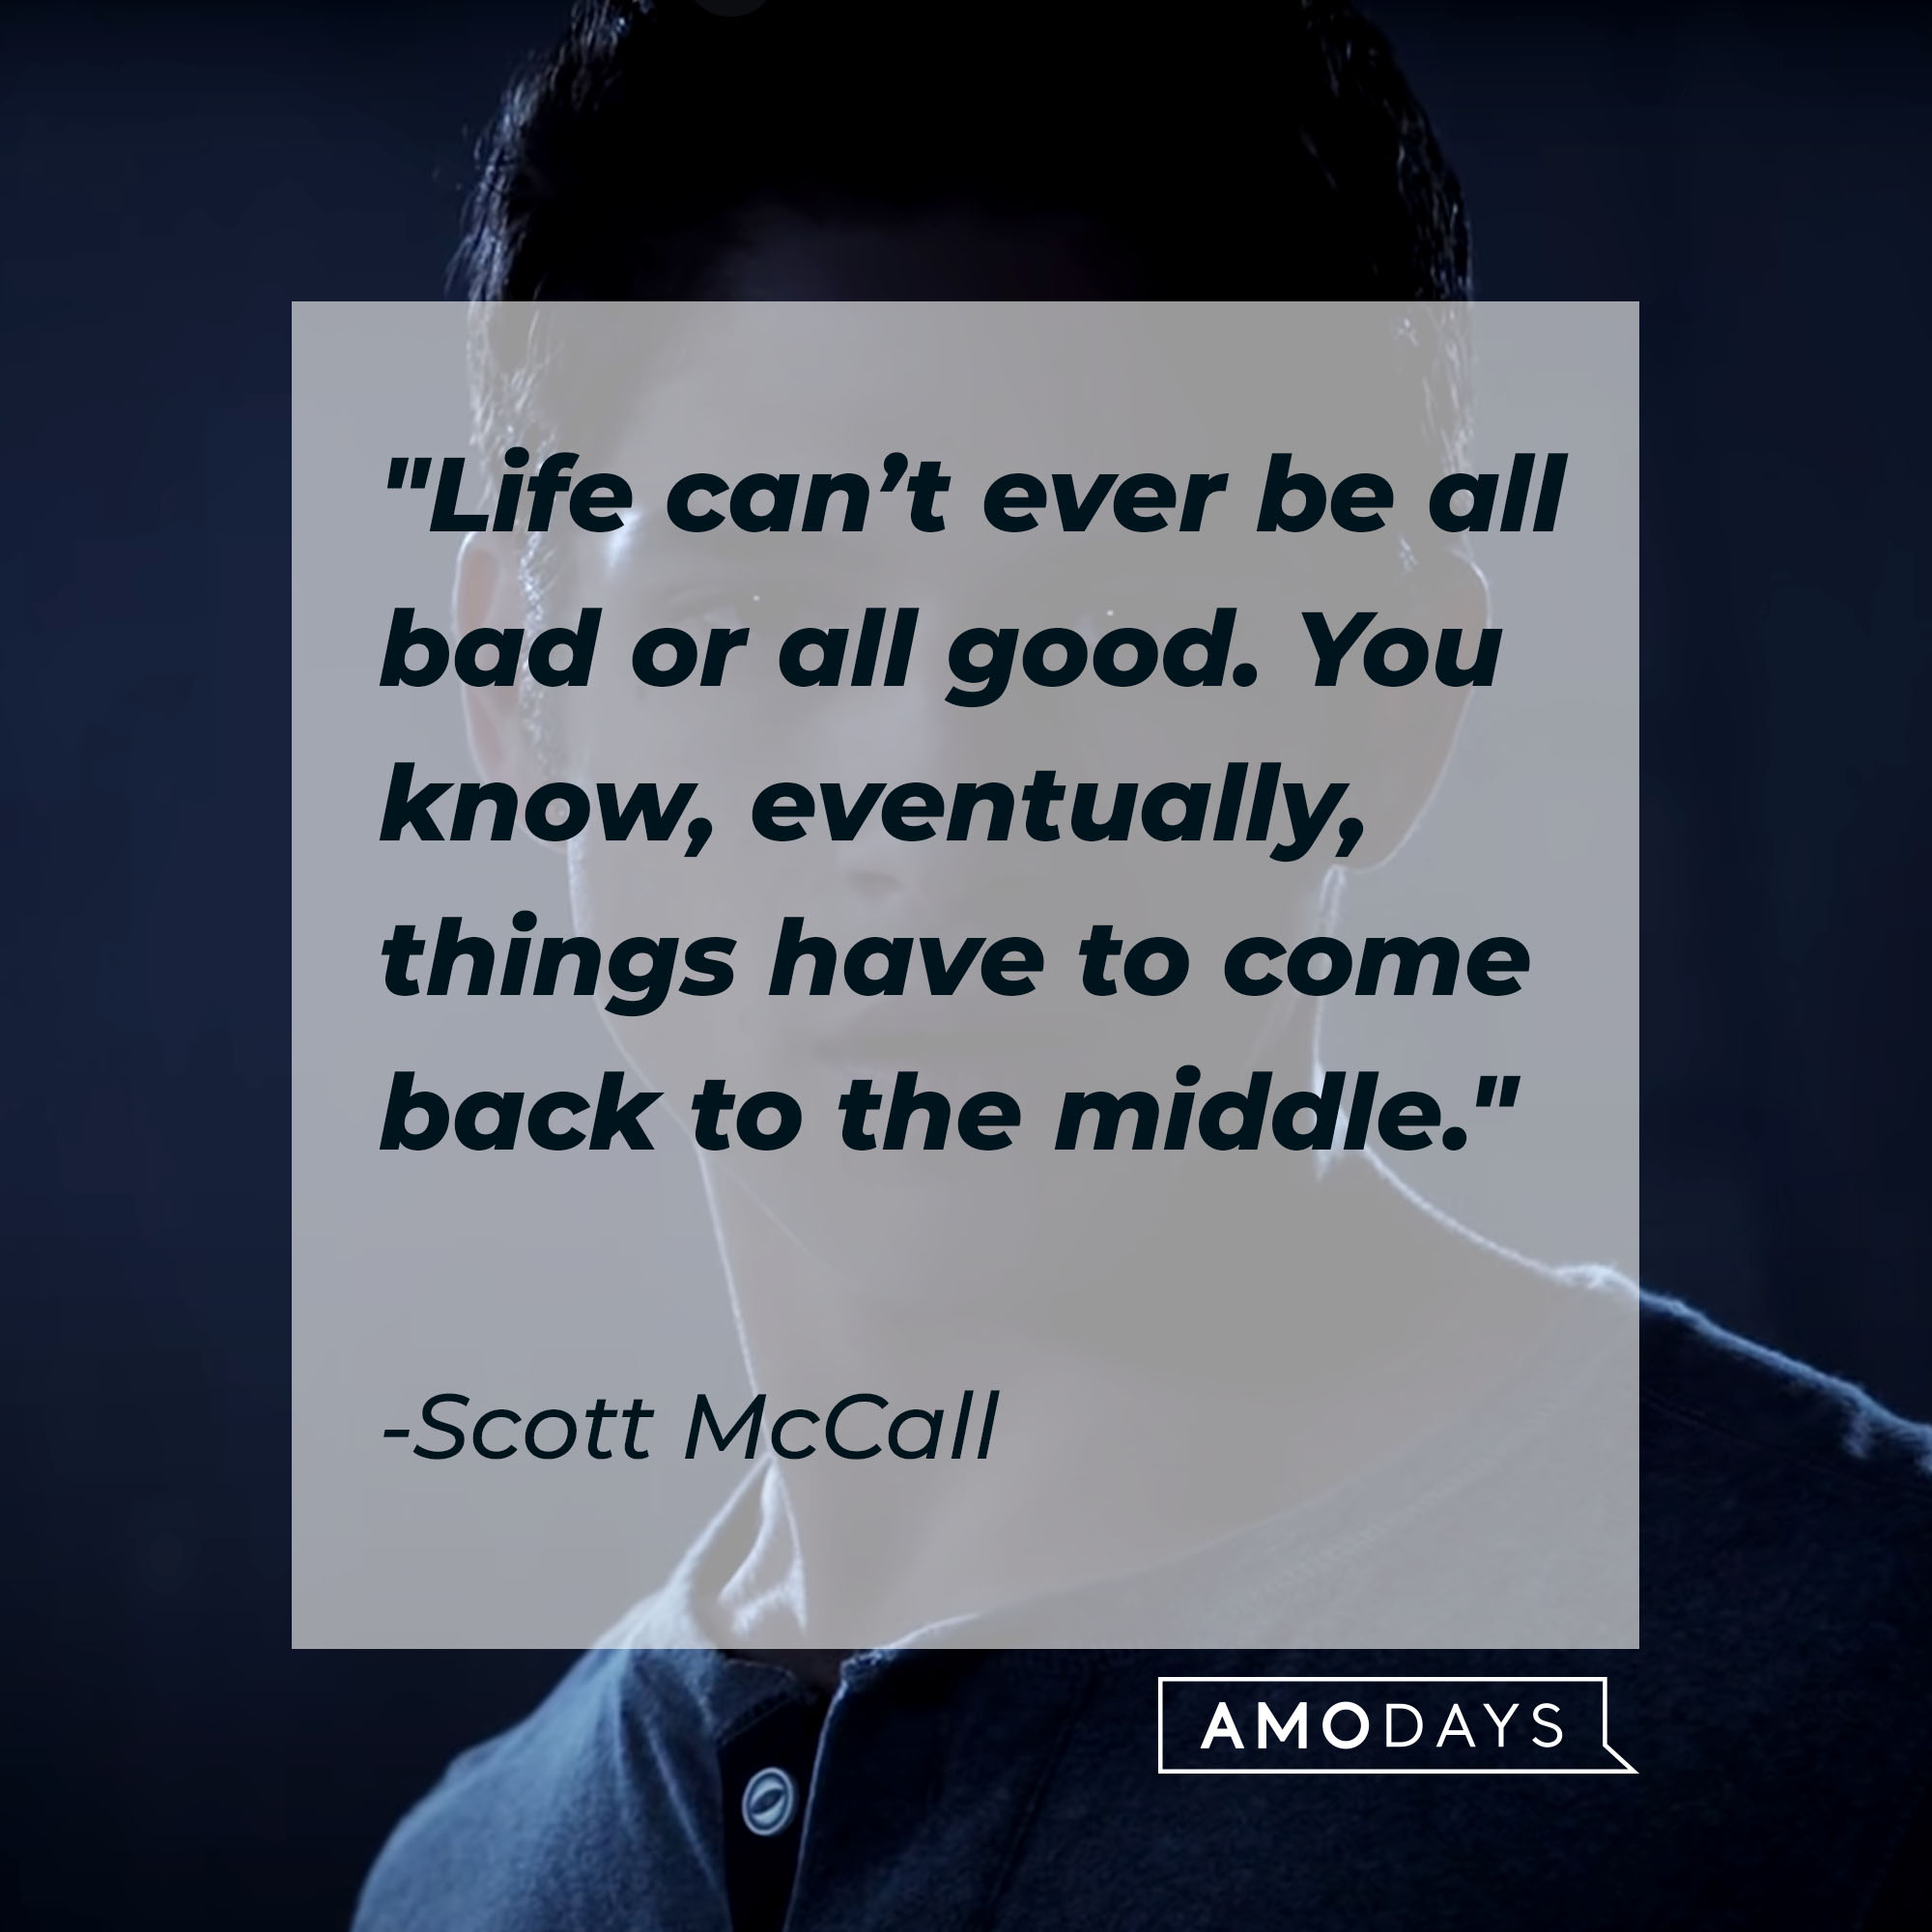 Scott McCall's quote: "Life can't ever be all bad or all good. You know, eventually, things have to come back to the middle" | Source: Youtube.com/WolfWatch